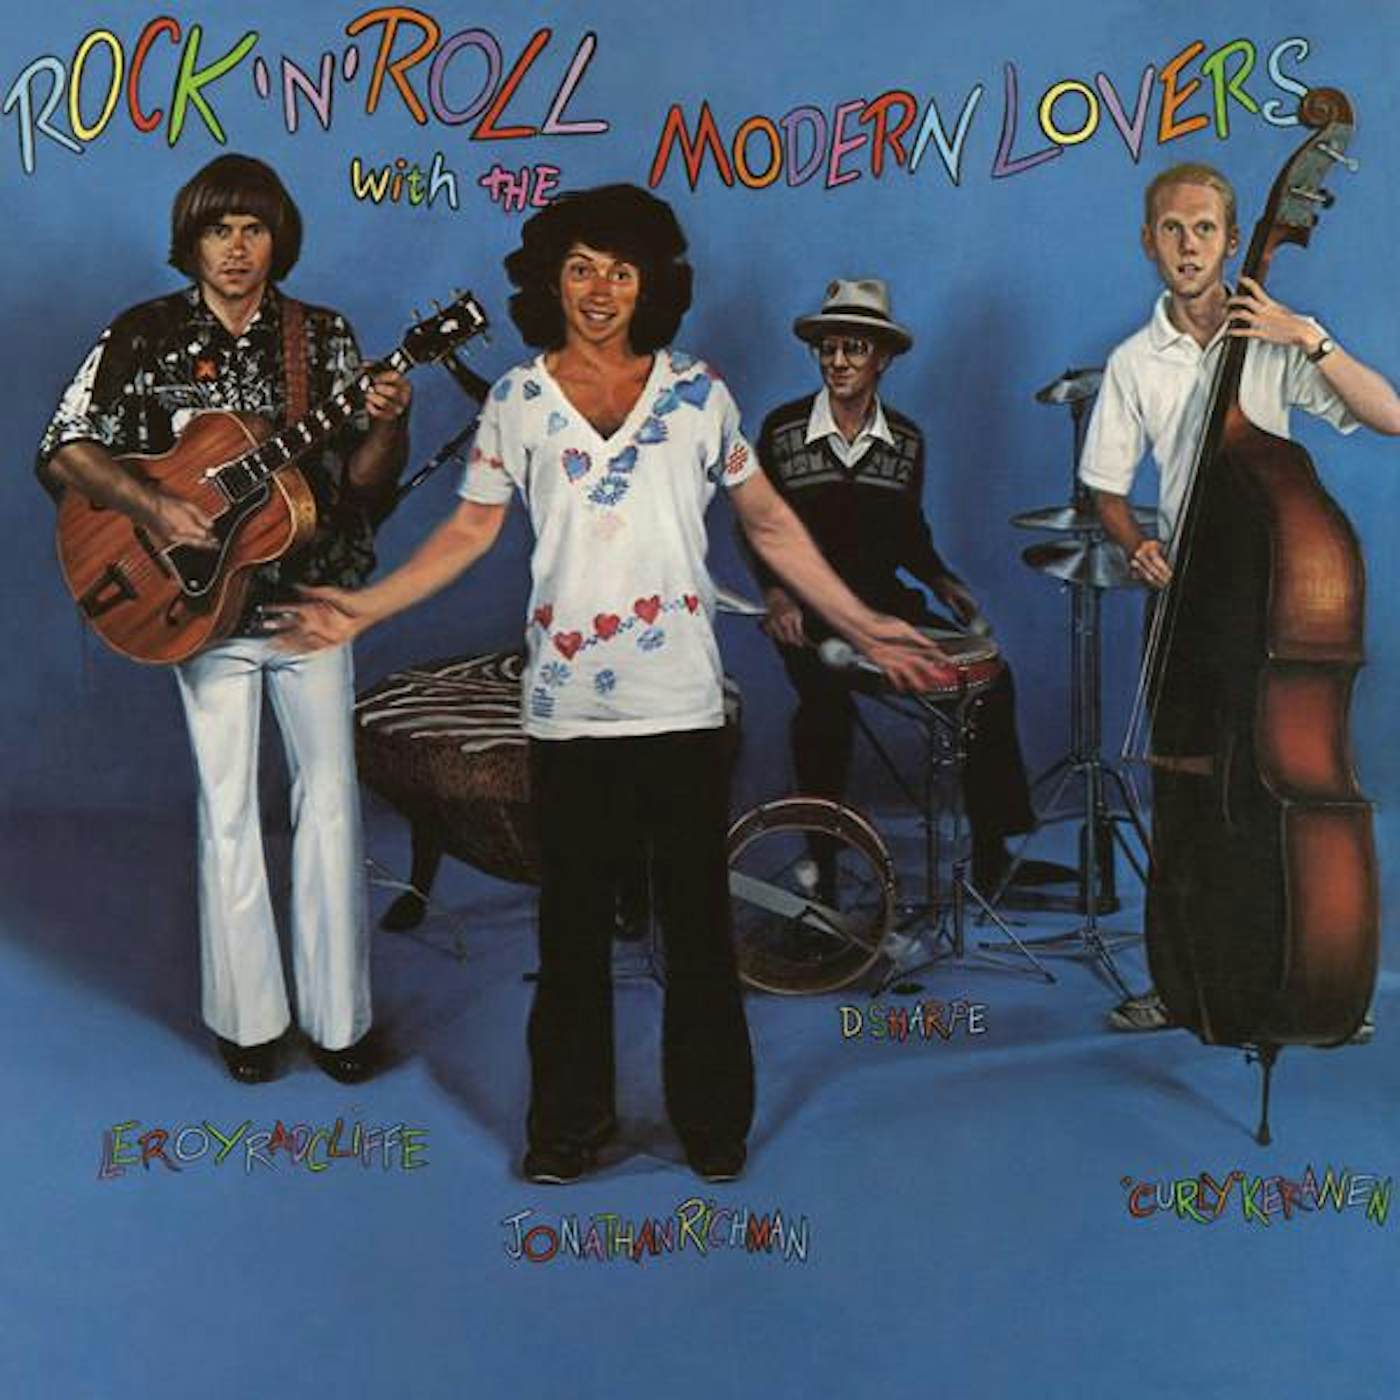 Jonathan Richman & The Modern Lovers ROCK N ROLL WITH THE MODERN LOVERS Vinyl Record